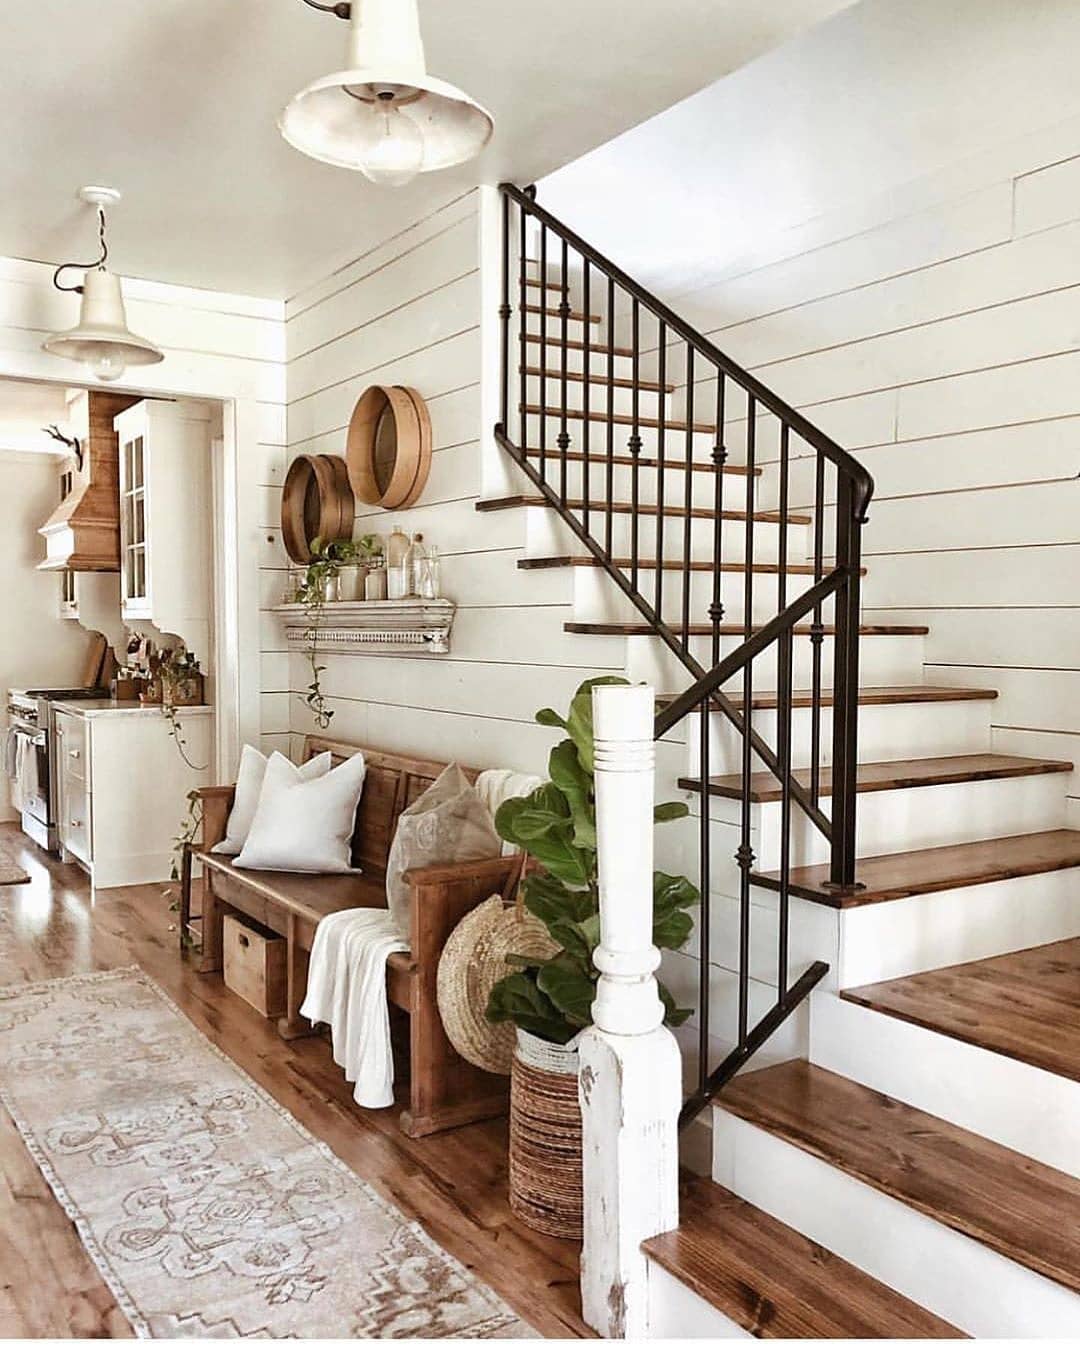 Entryway decorated in Modern Farmhouse with all white walls. Photo by Instagram user @whitetailfarmhouse